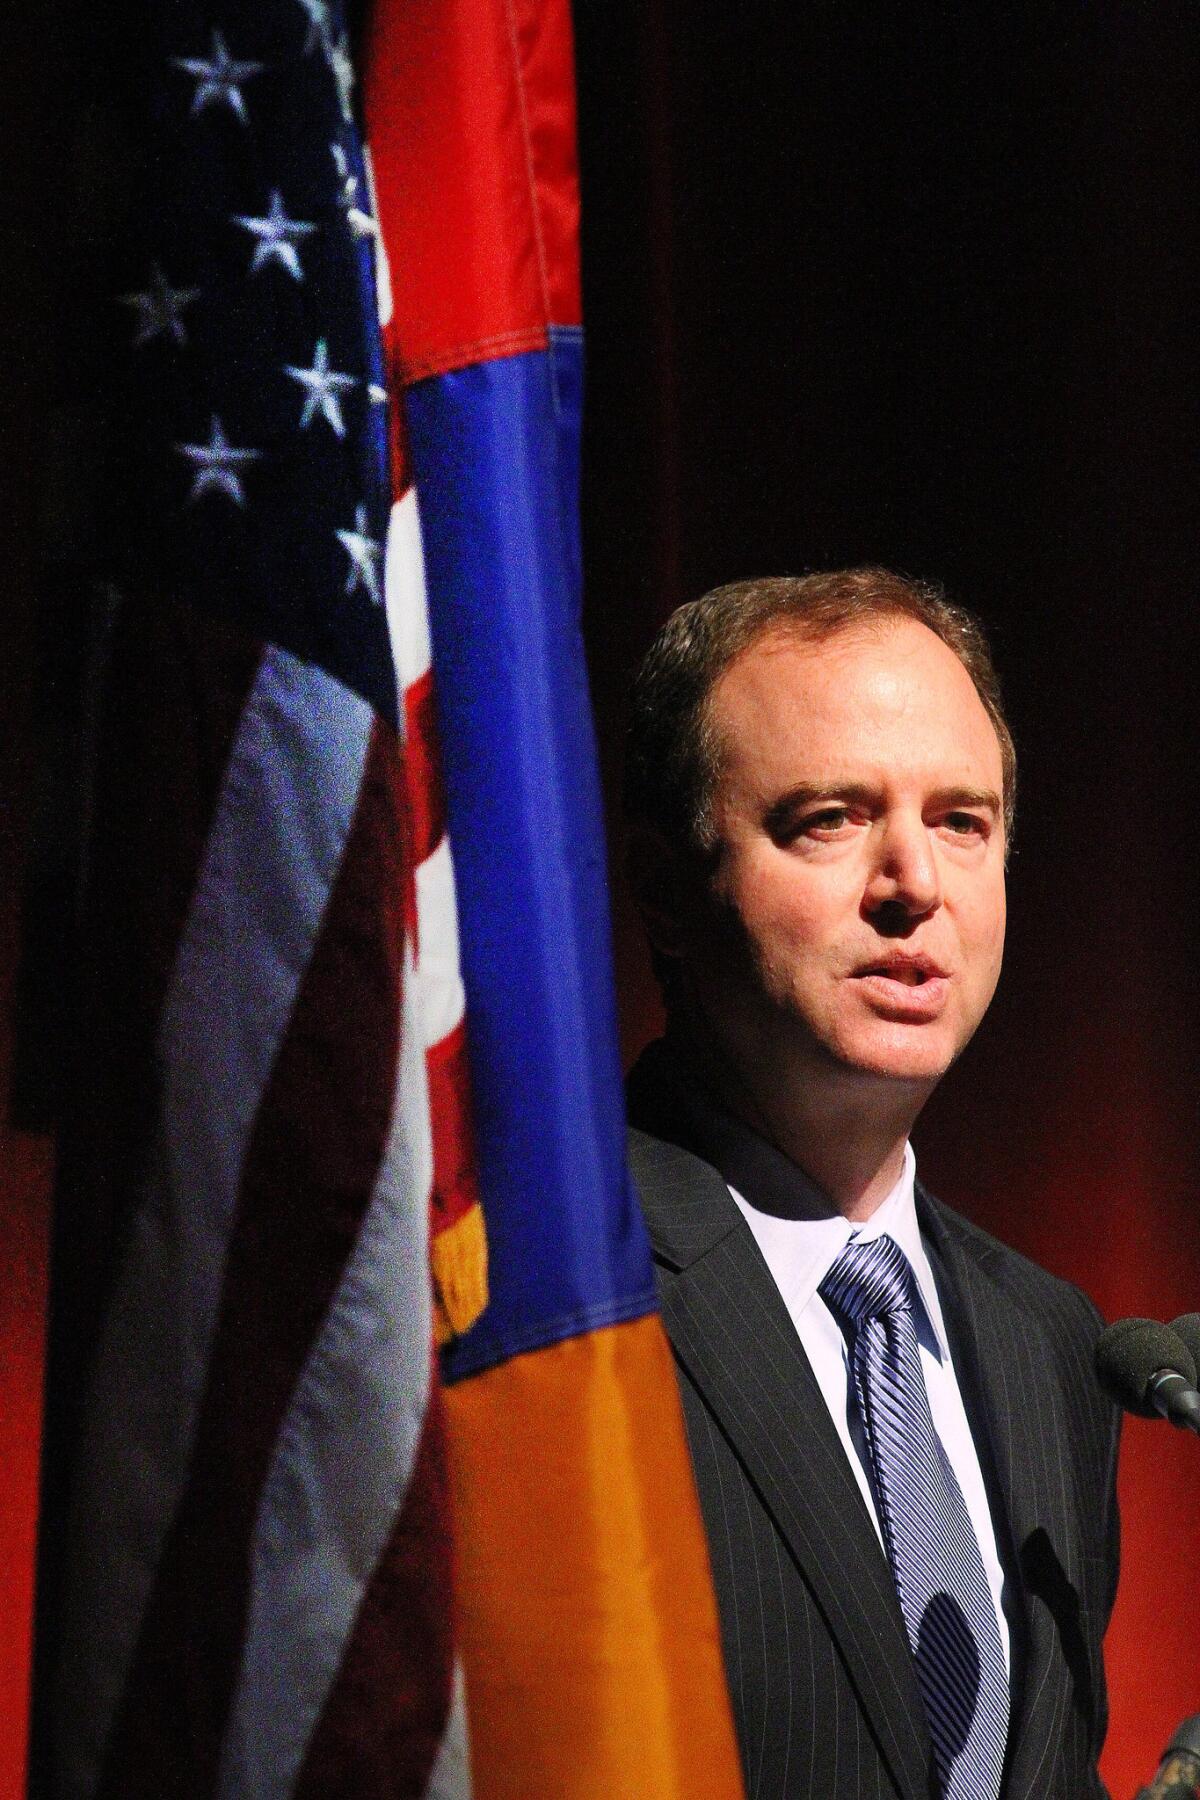 Rep. Adam Schiff (D-Burbank) speaks at the city of Glendale's 13th annual Commemoration of the Armenian Genocide at the Alex Theatre on Thursday, April 24, 2014. This week, Schiff spoke out against a proposal for a high-speed rail system running through an underground tunnel beneath the Angeles National Forest.